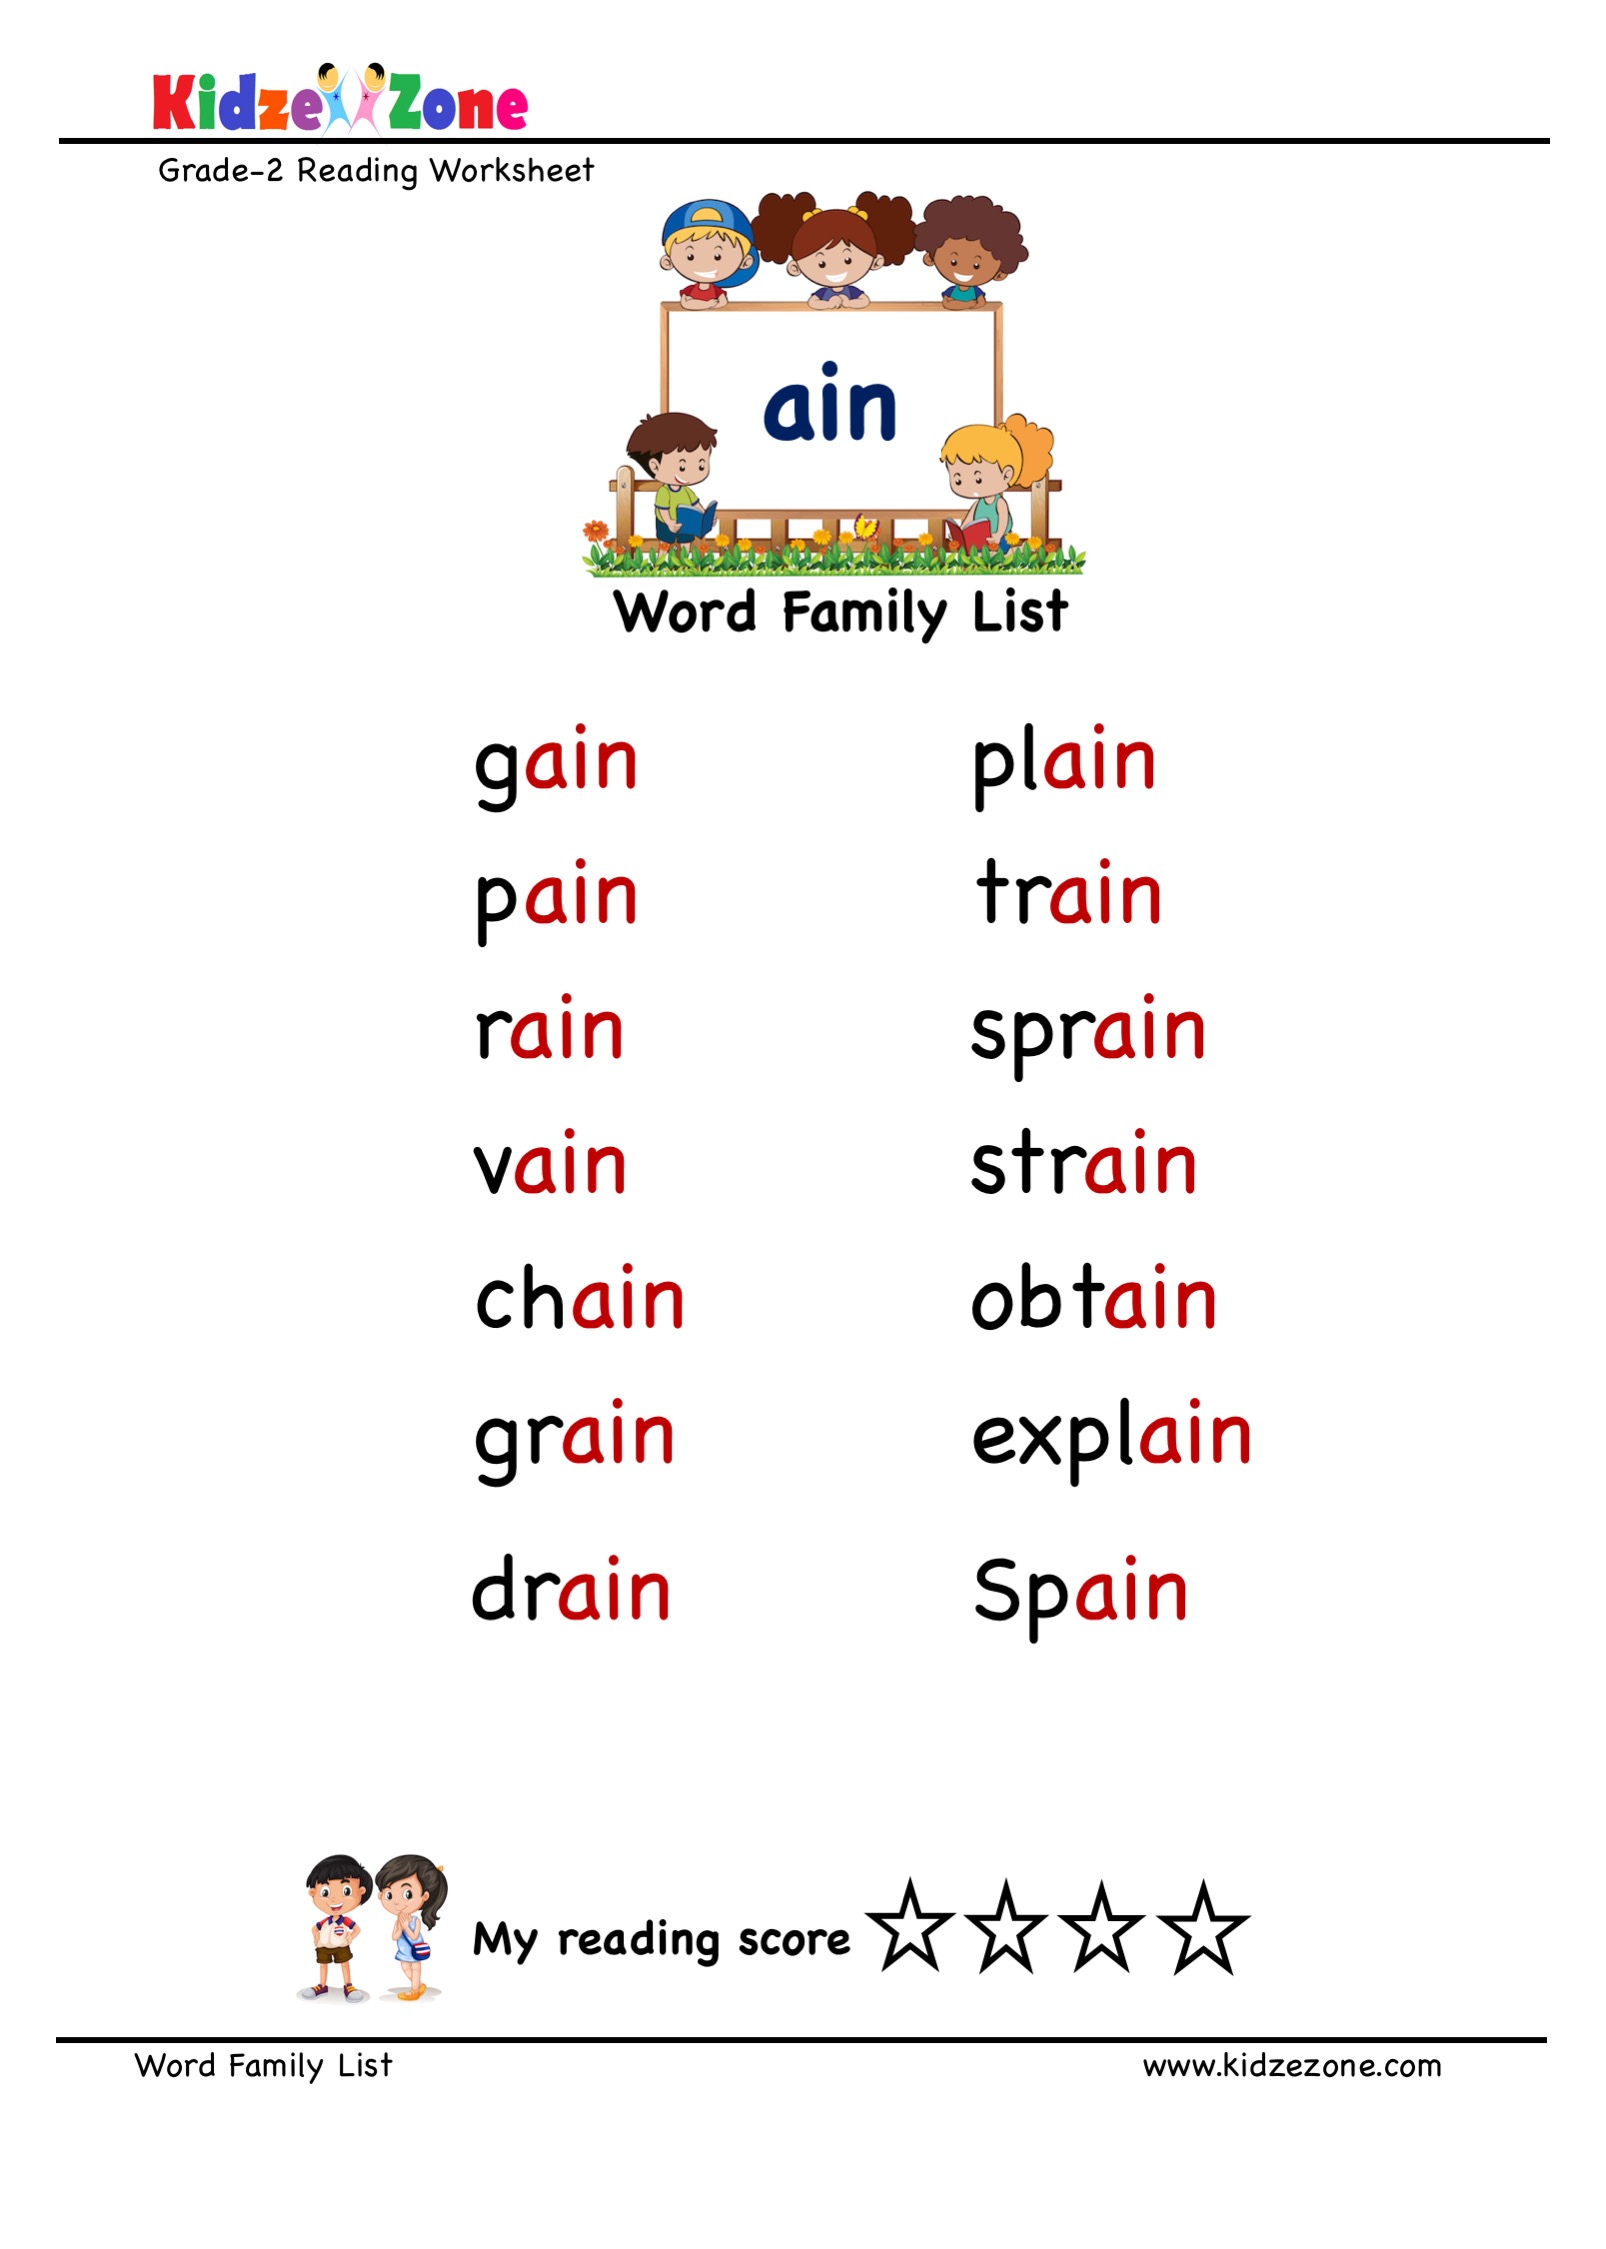 Explore and learn words from "ain" word family with word list worksheet